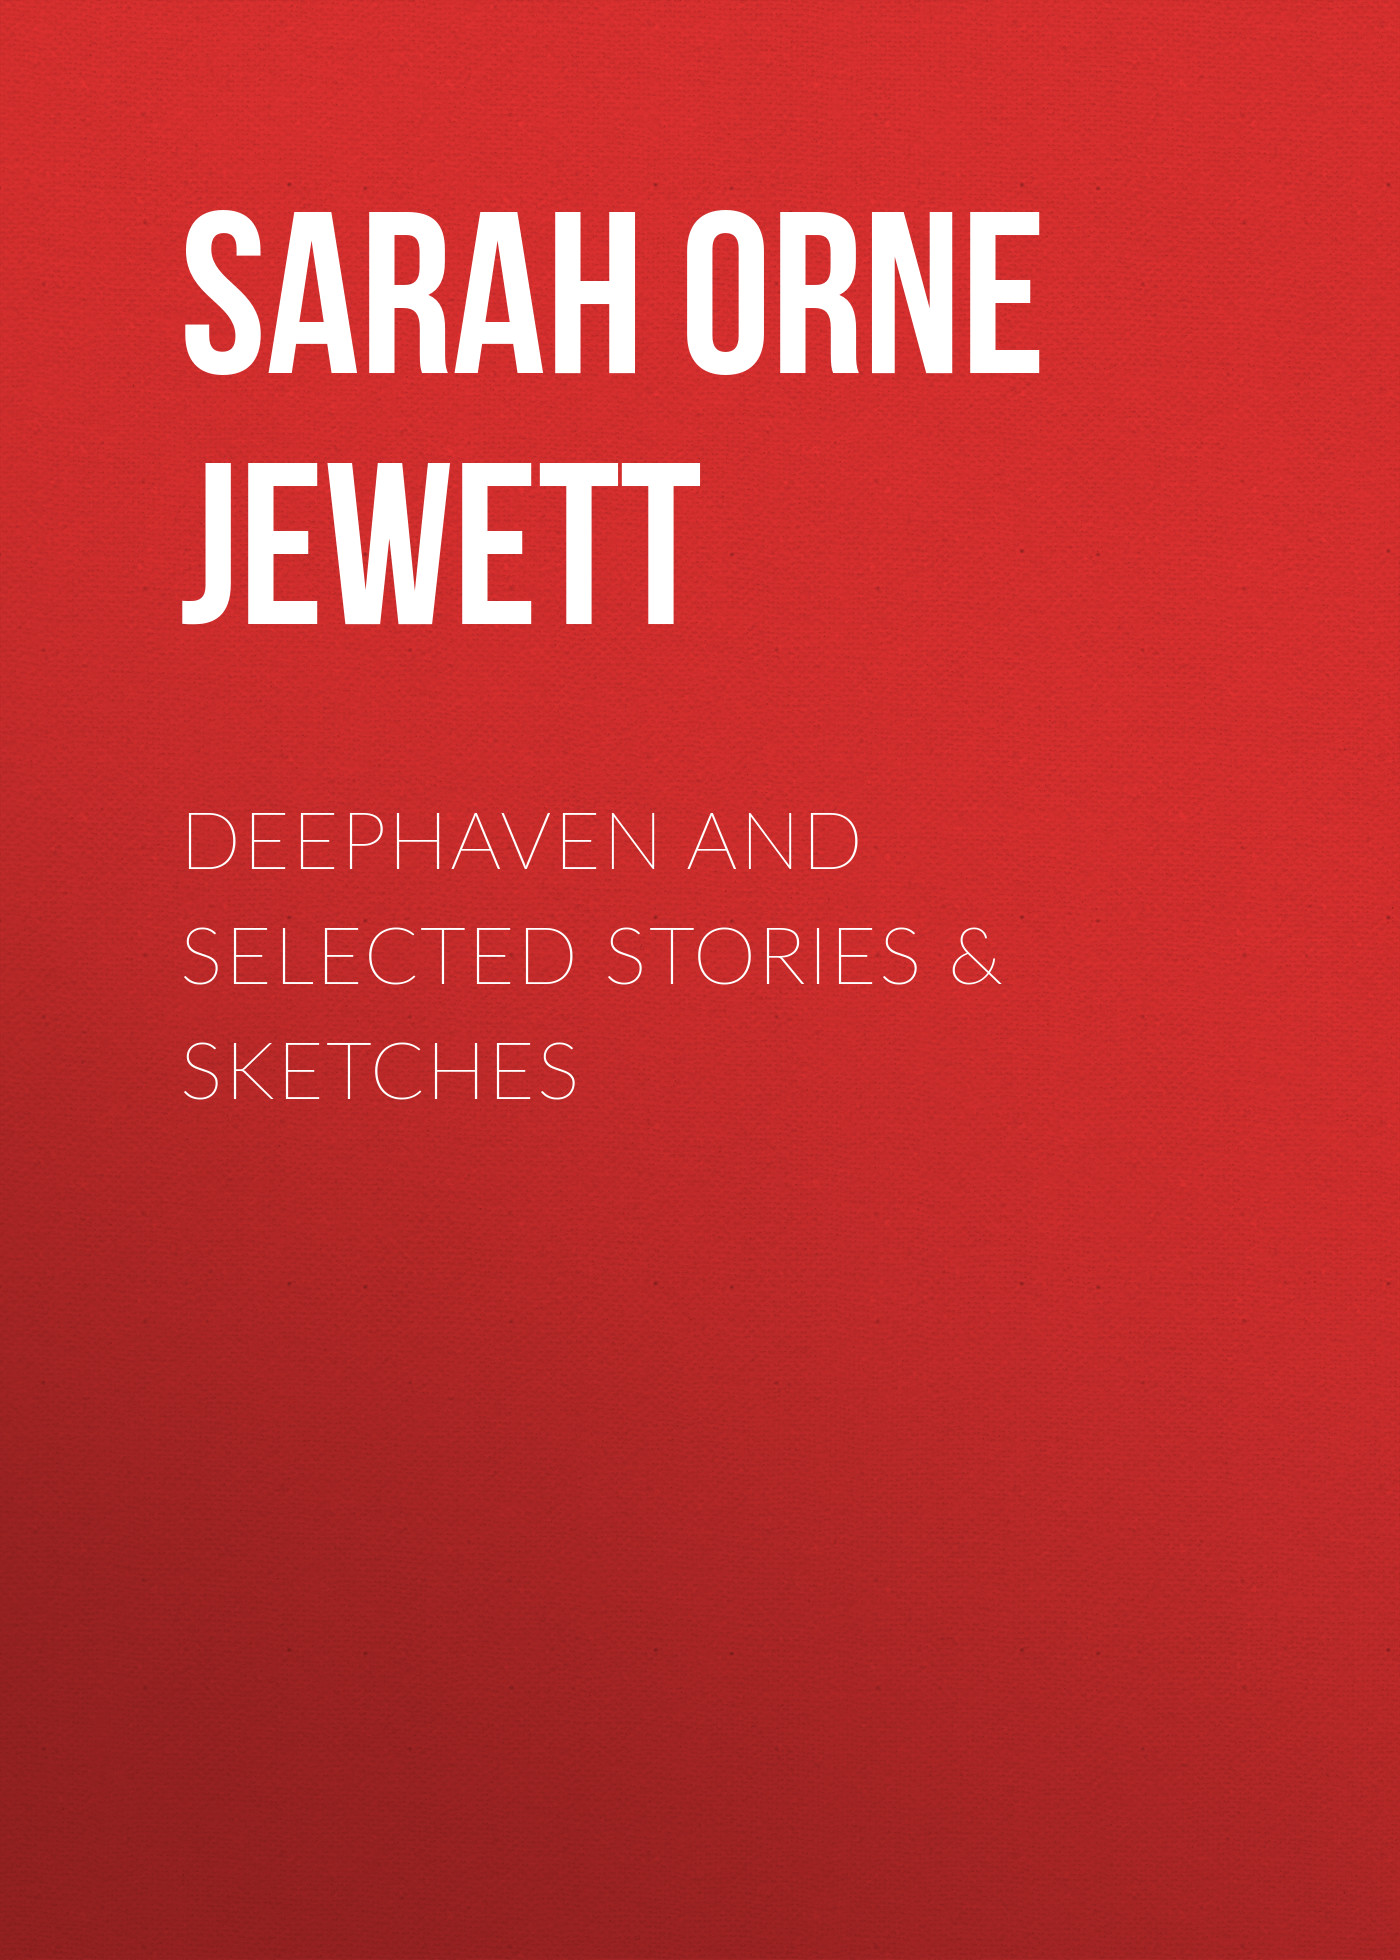 Deephaven and Selected Stories&Sketches